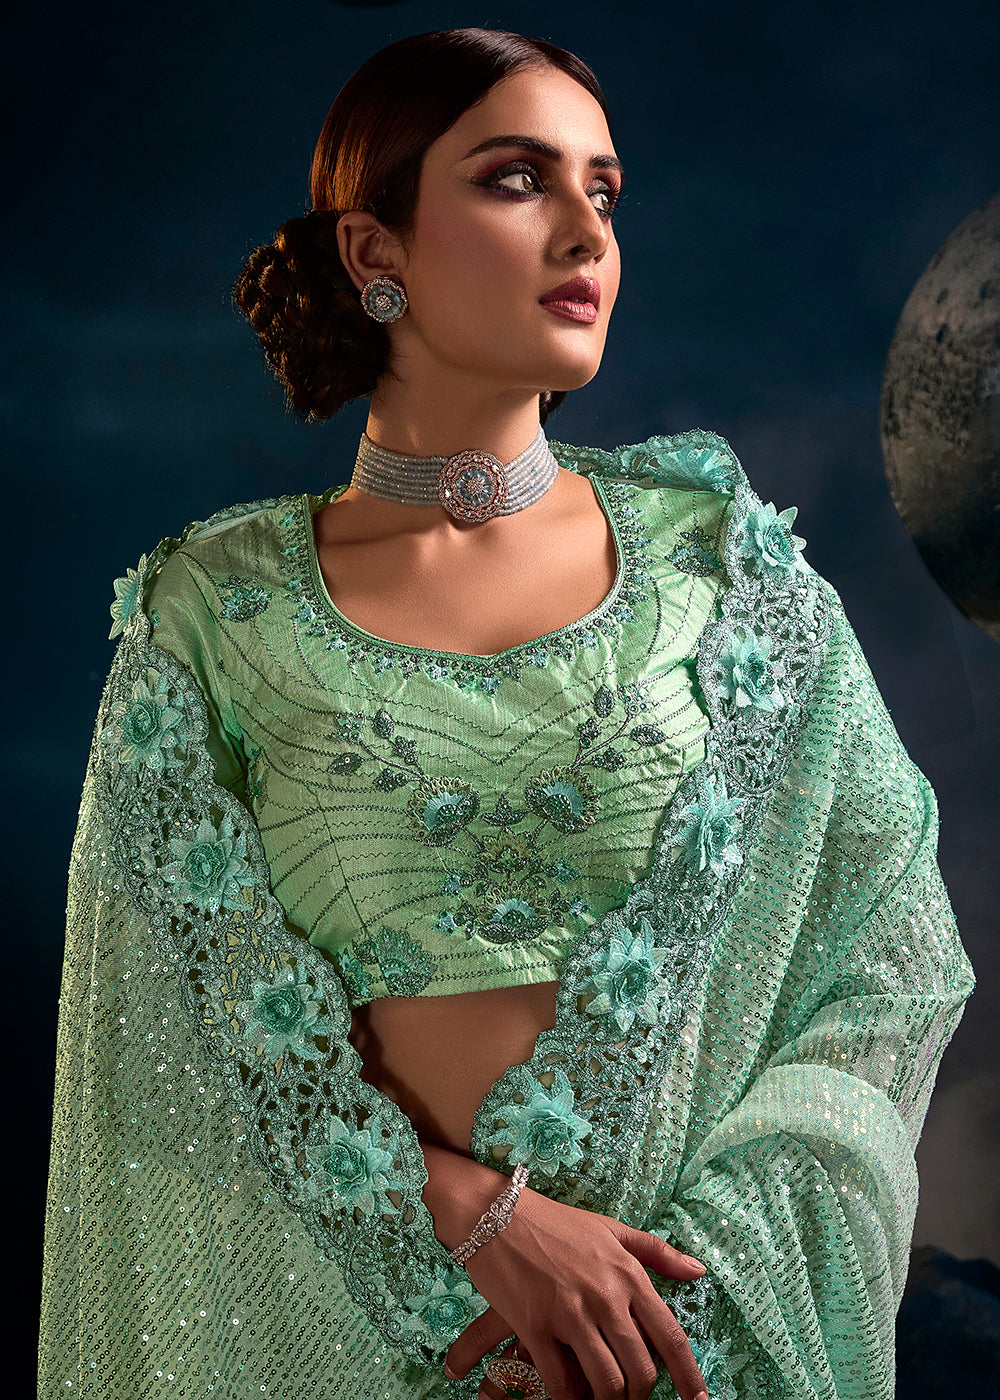 Buy Now Sea Green Premium Net Heavy Embroidered Designer Saree Online in USA, UK, Canada & Worldwide at Empress Clothing.